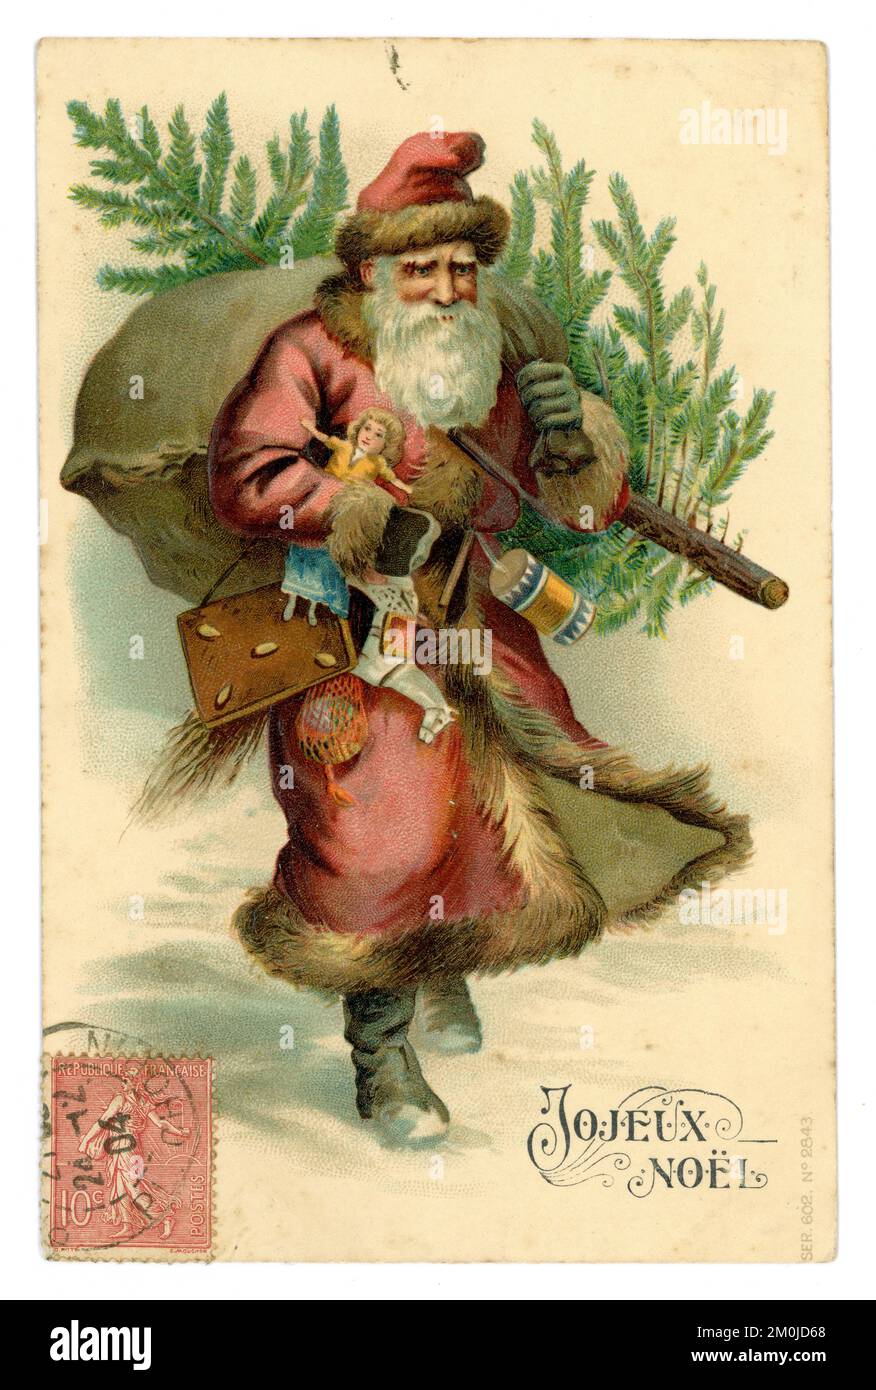 Edwardian era greetings card postcard of Father Christmas carrying presents and a tree with French stamp on front, greetings is joyeux Noel.  posted / dated 24 December 1904 Stock Photo